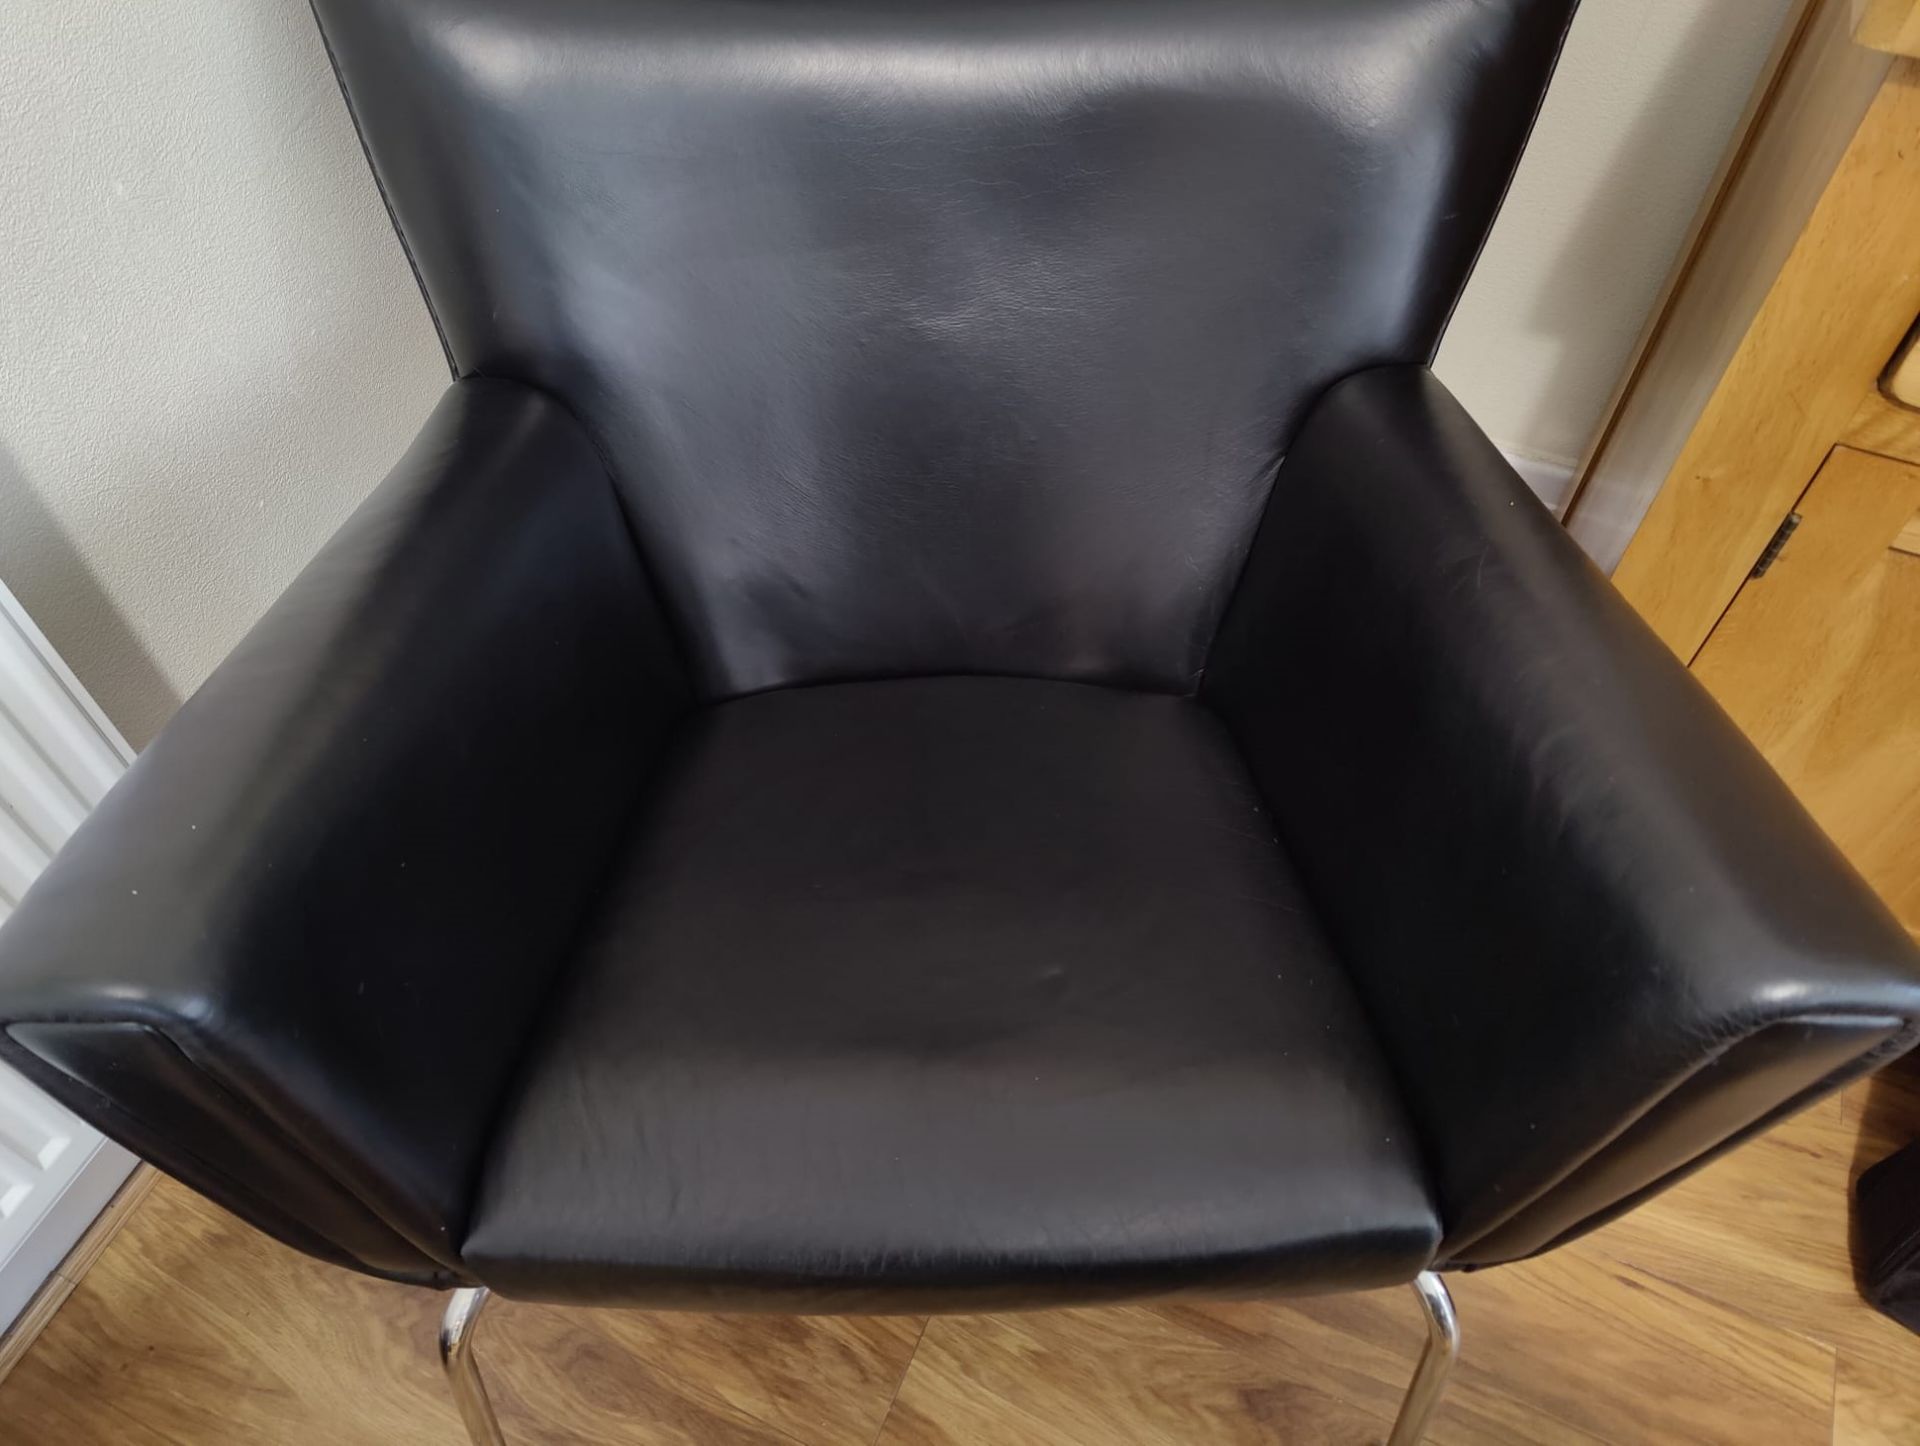 1 x Hans Wegner Inspired Wing Arm Chair - Genuine Black Leather Upholstery - Image 2 of 11